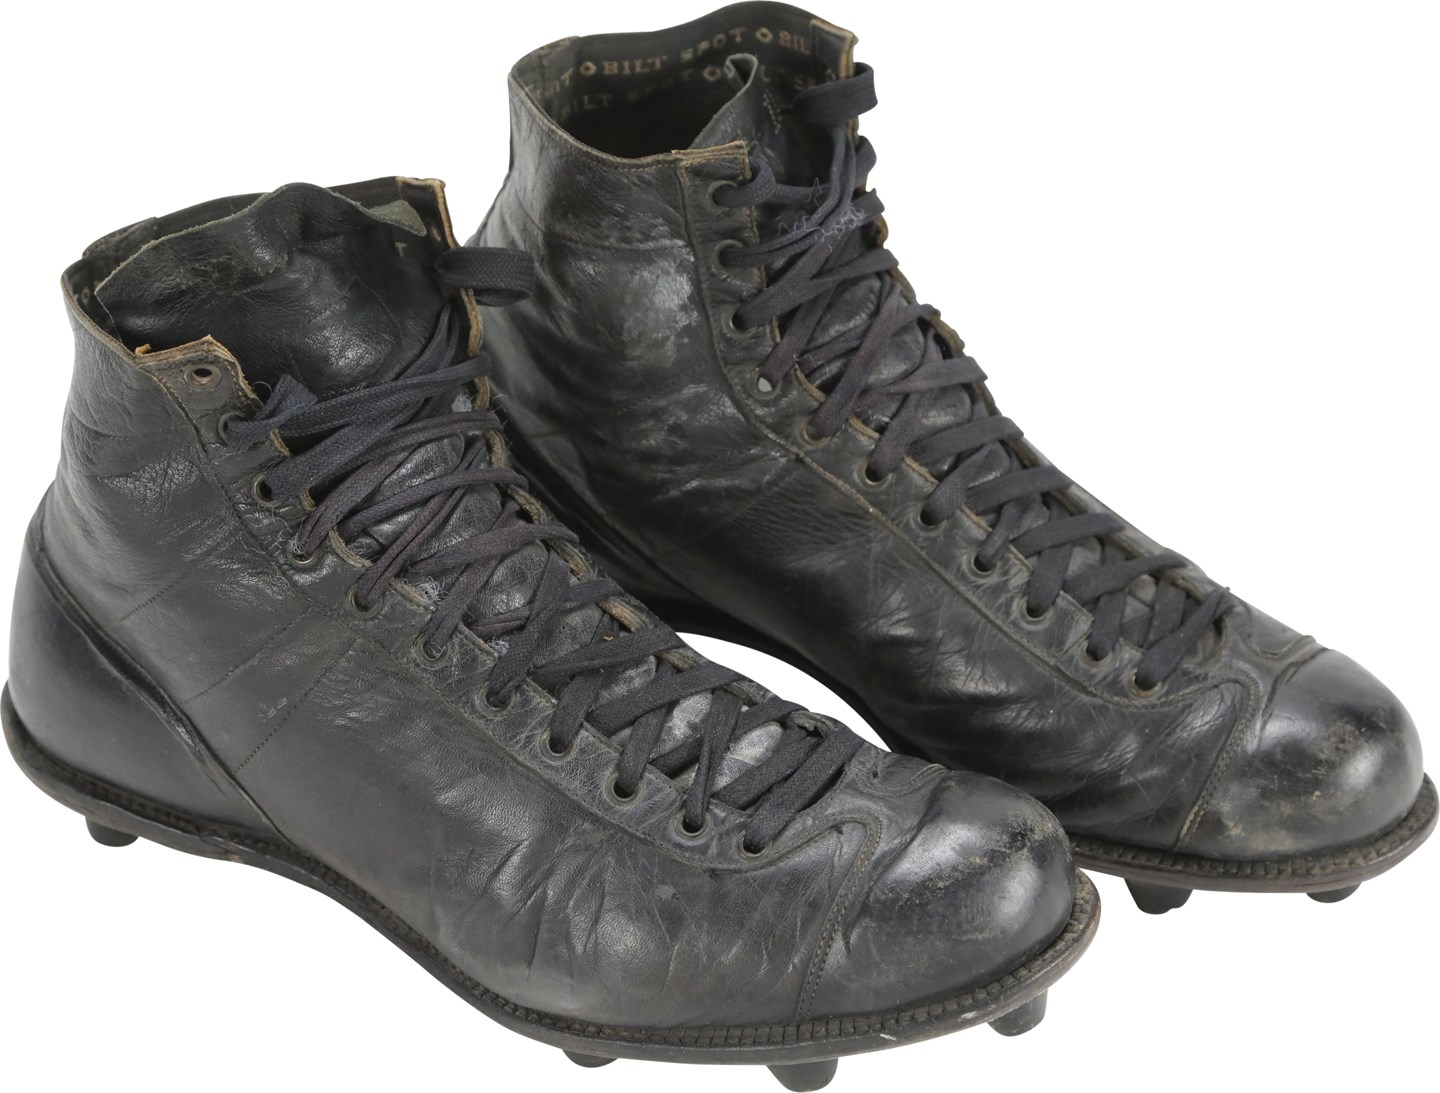 Football - Vintage High-Top Football Cleats Attributed to Mel Hein (Ex-Duke Hott Collection)